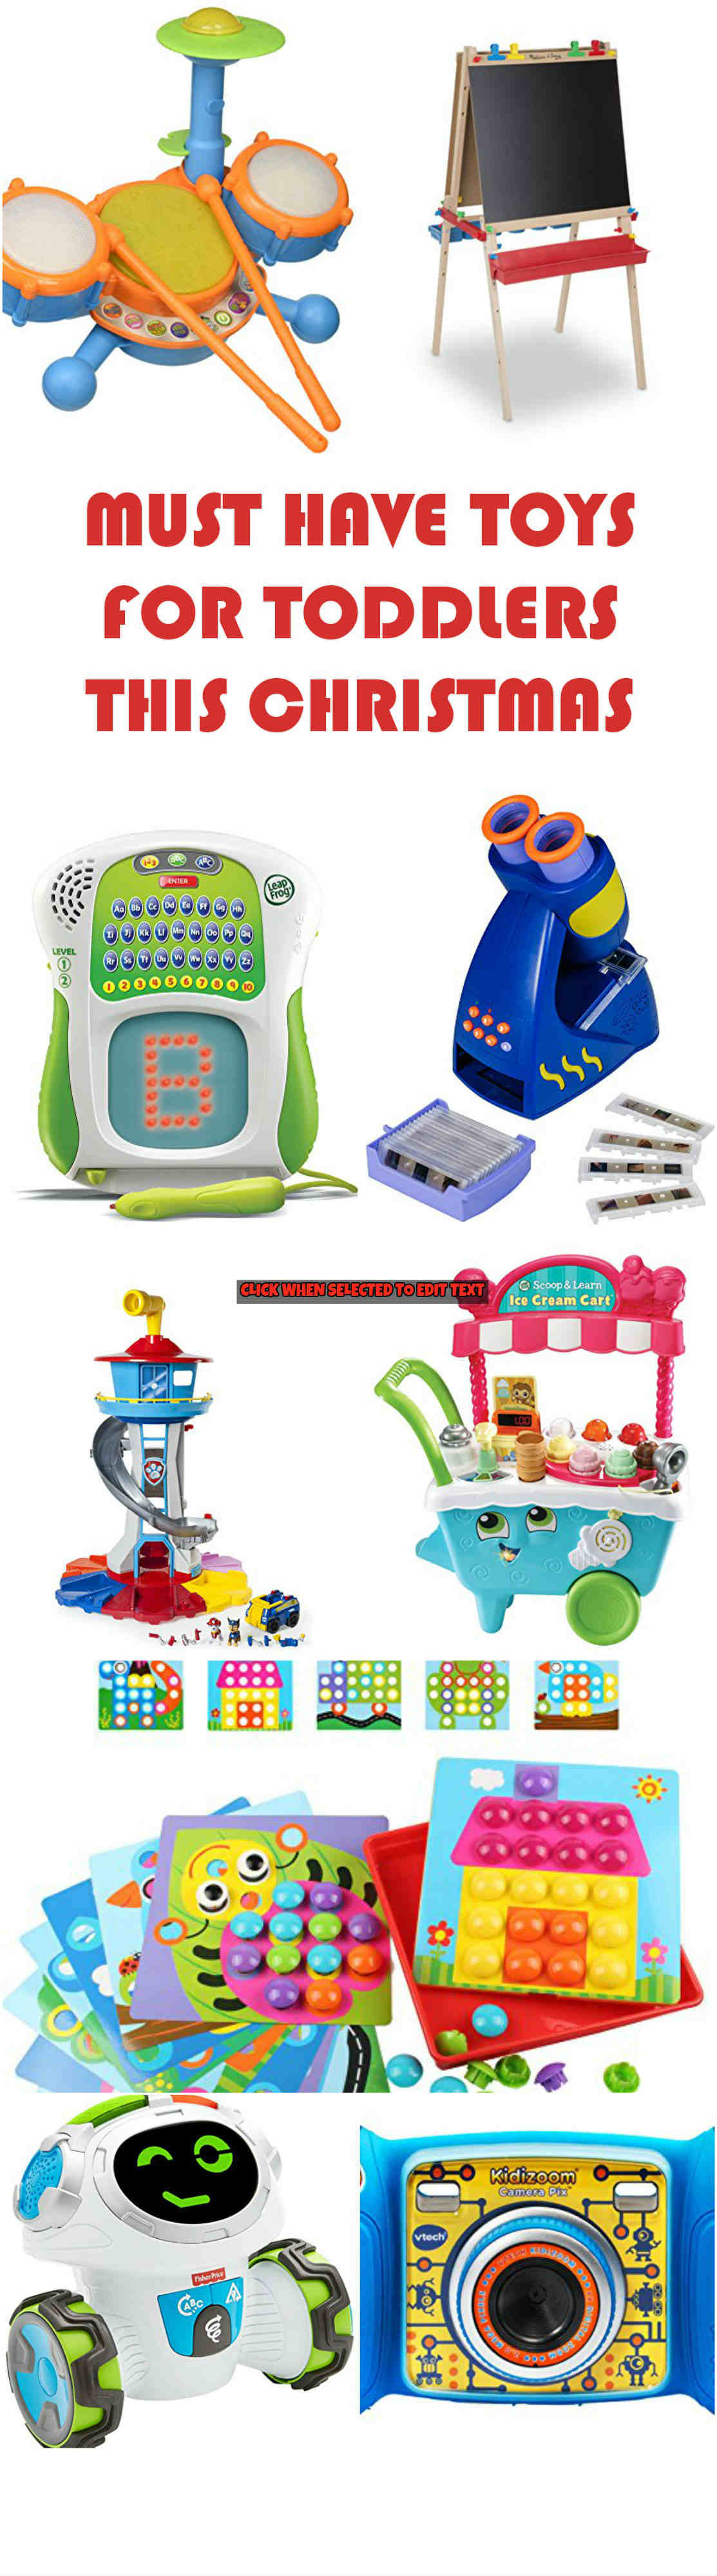 10 Must Have Toys for Toddlers this Christmas